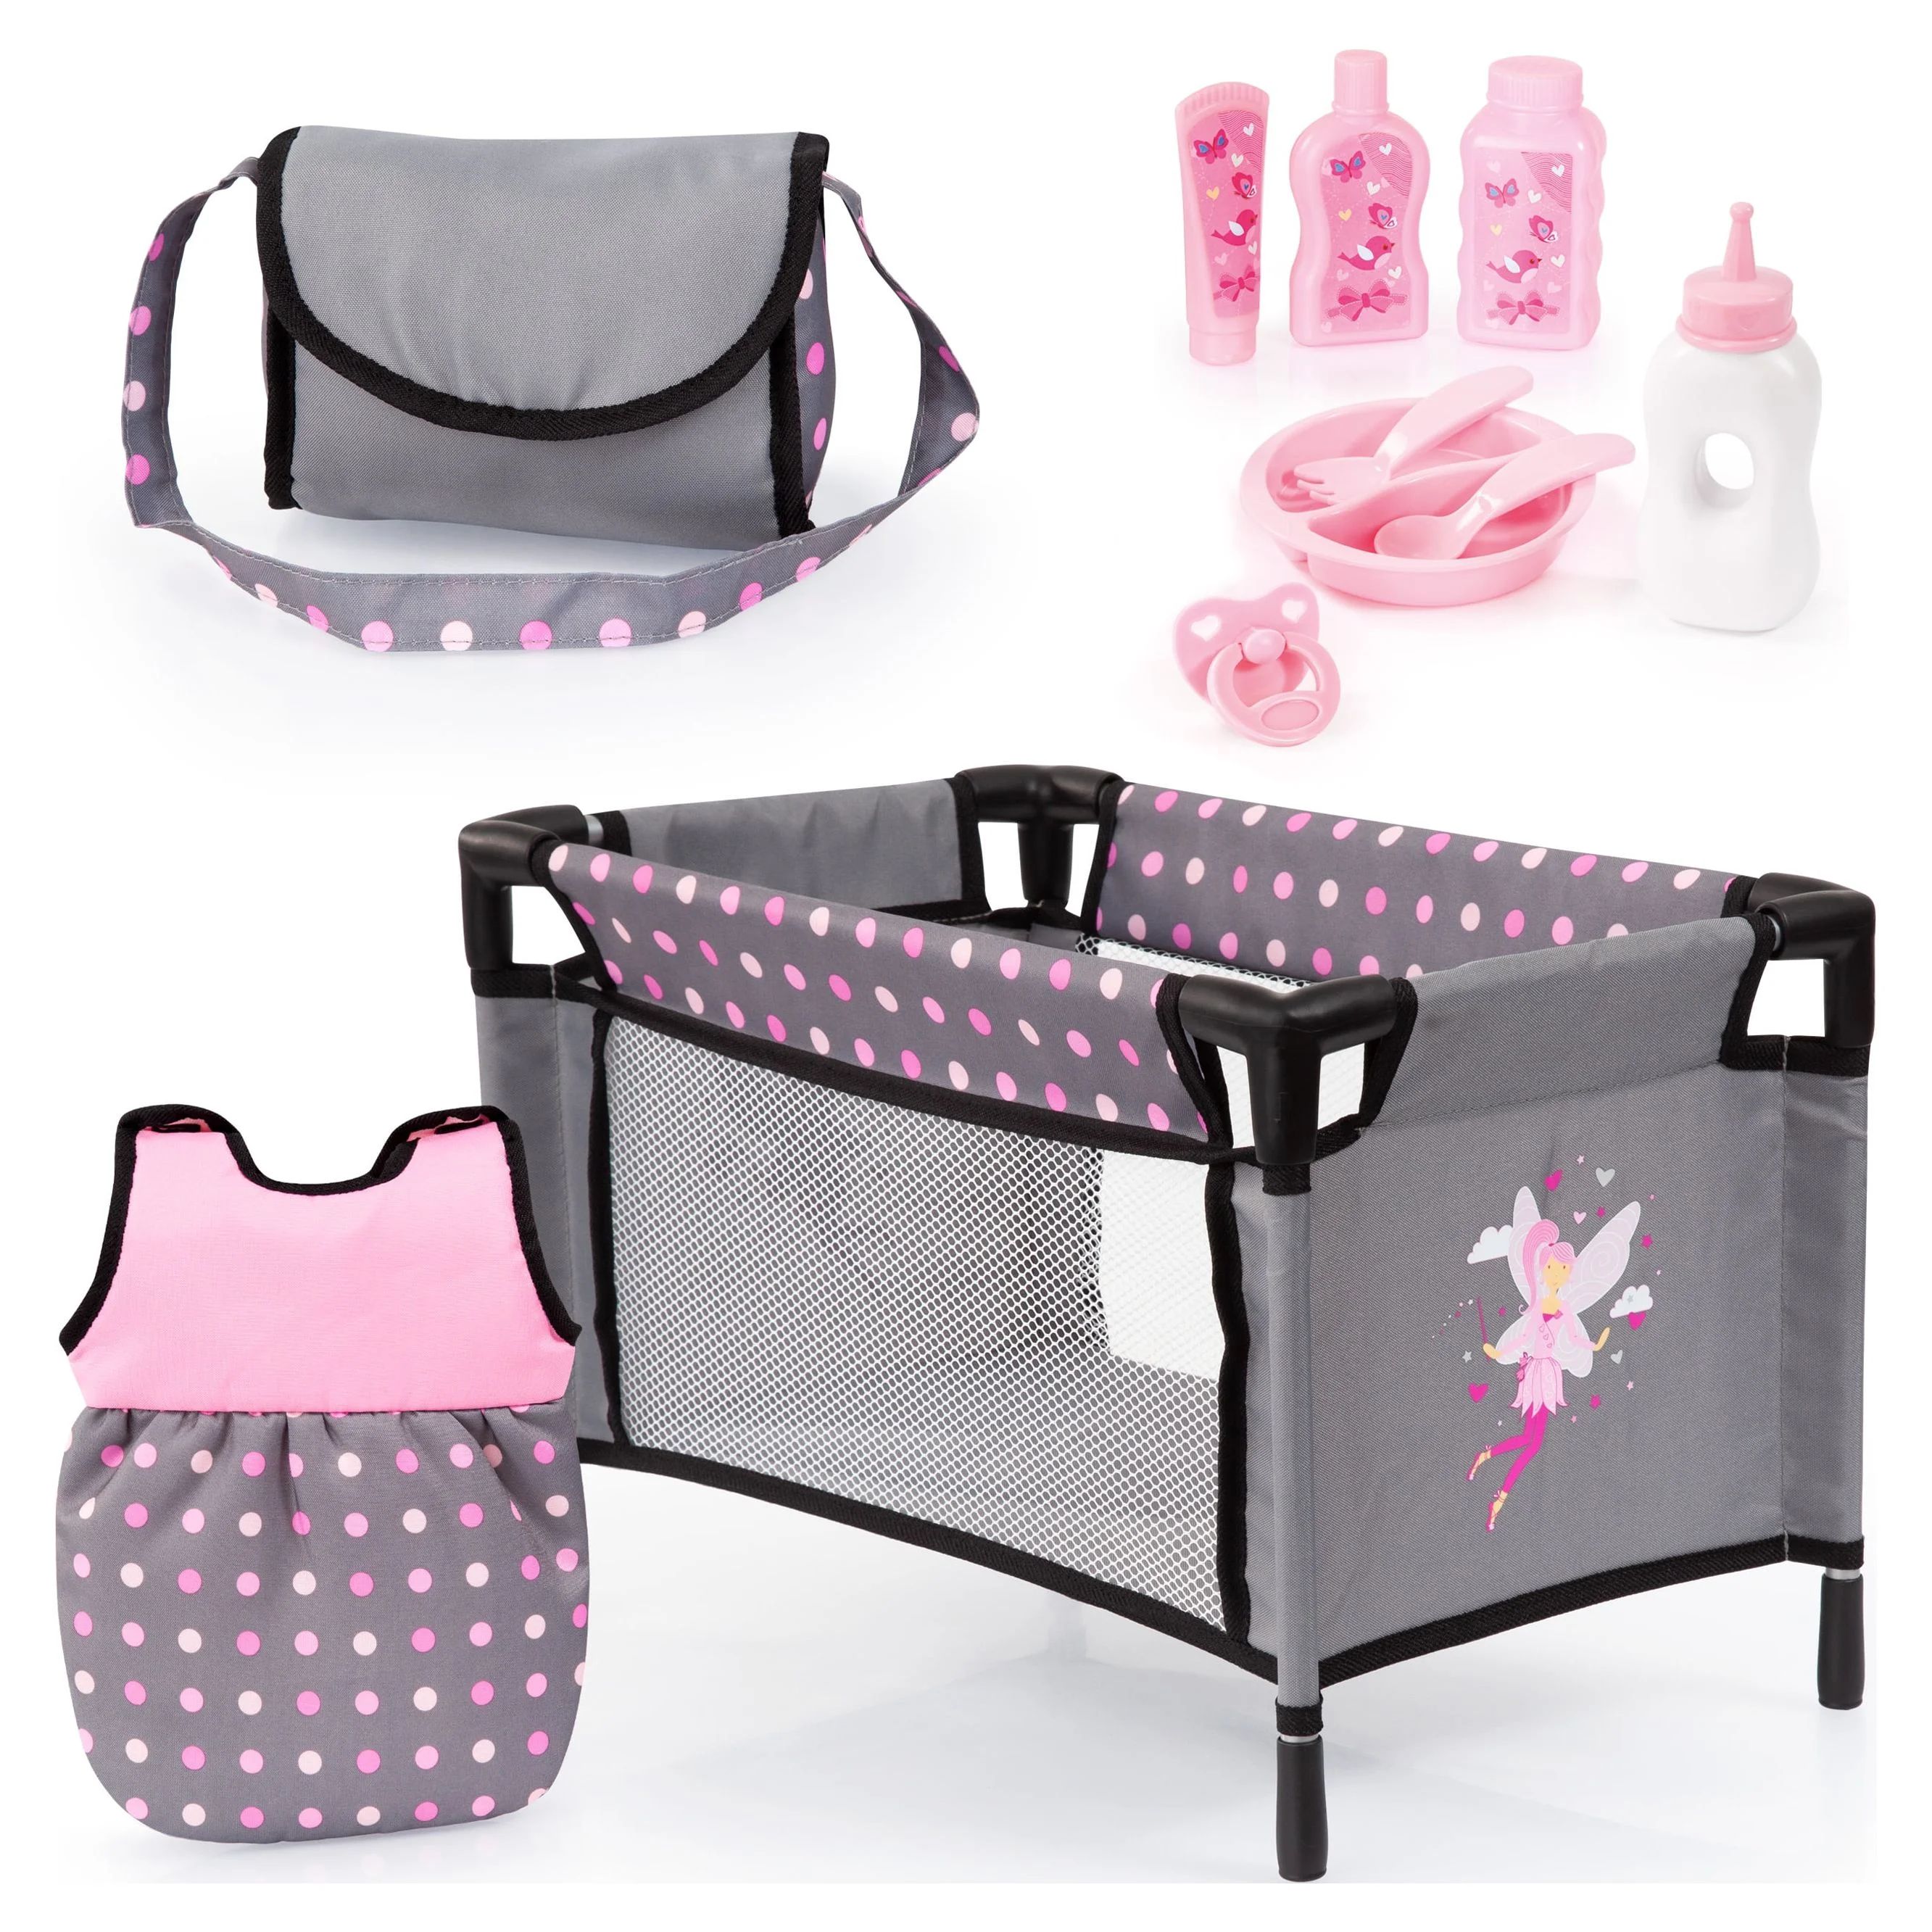 Bayer Baby Doll Travel Bed for Toy Baby Doll/Stuffed Animals with Accessories | Walmart (US)